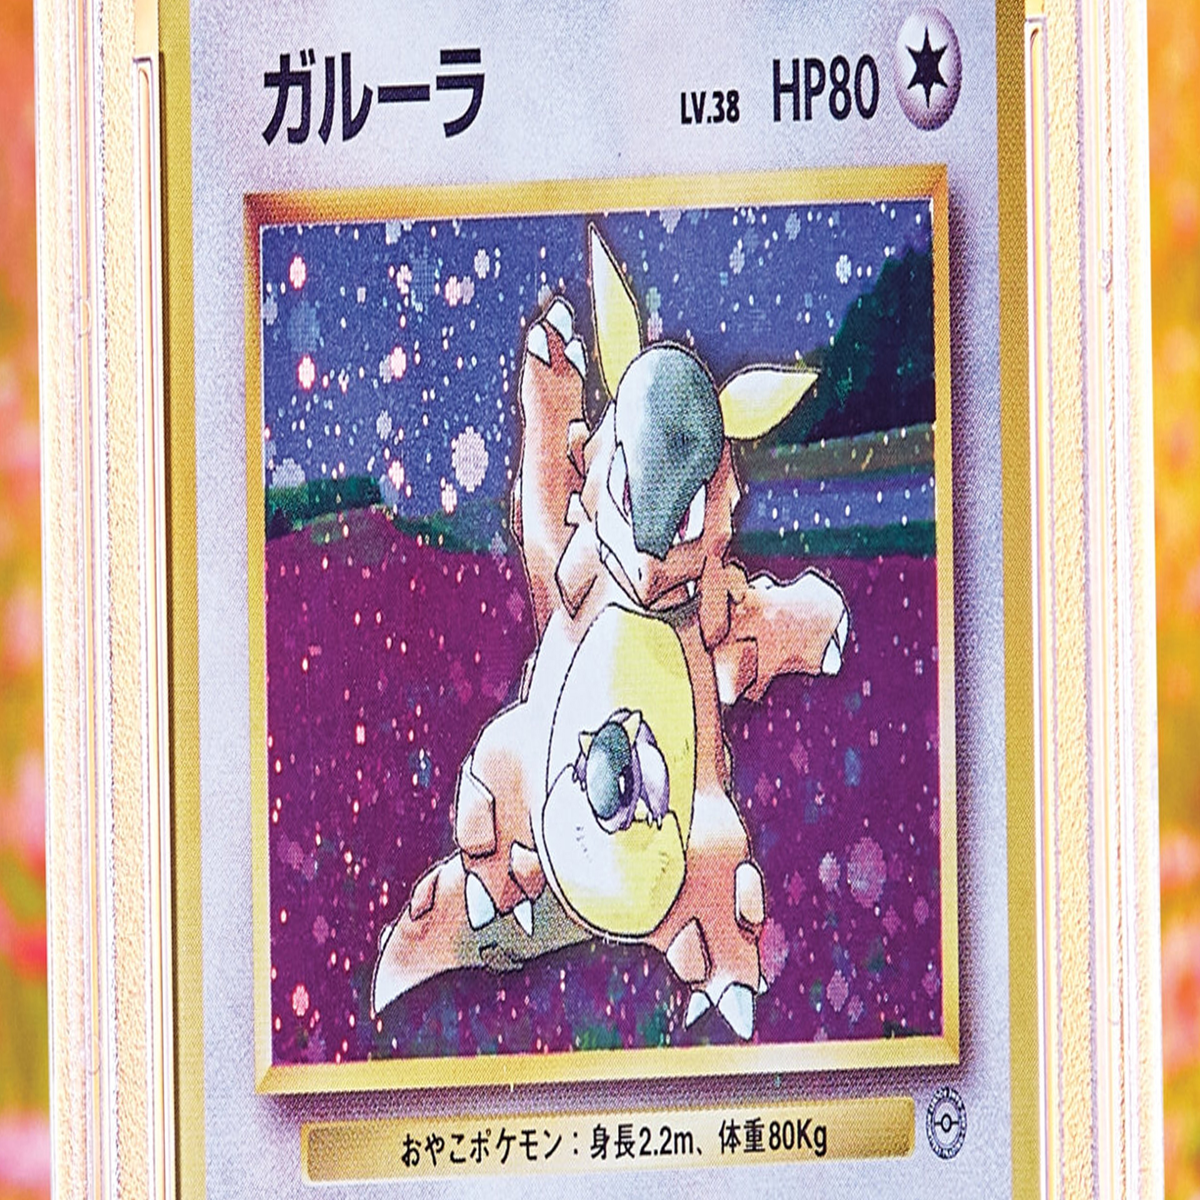 A Pokémon card 'holy grail', one of only a dozen copies in perfect